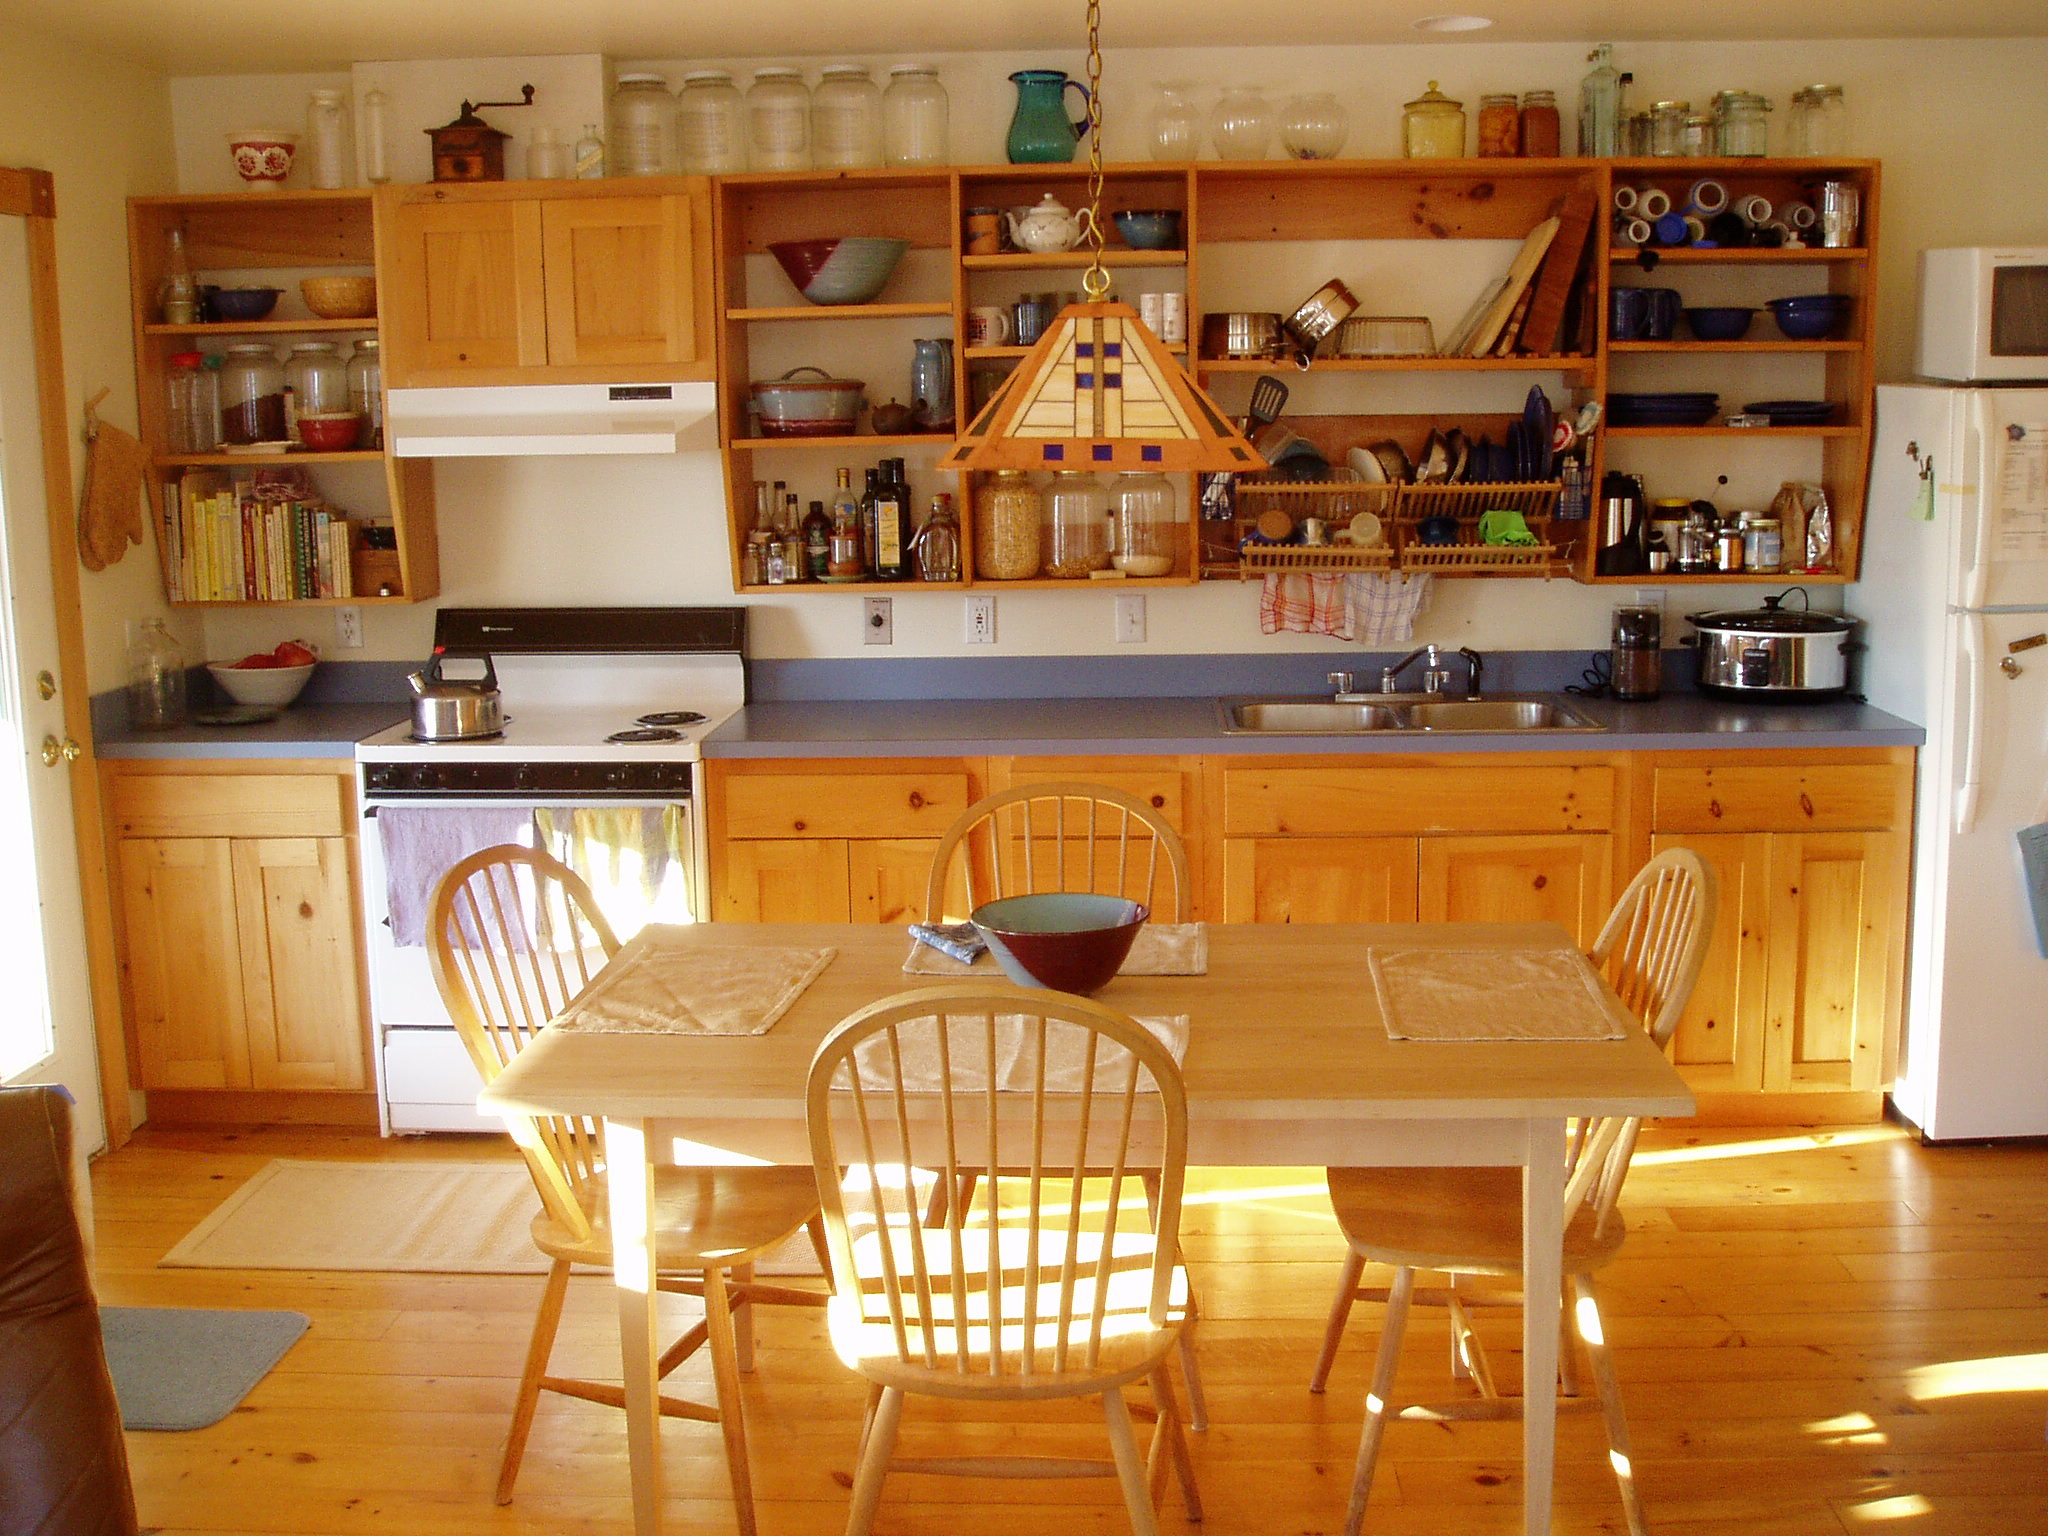 Interior view of dining and kitchen showing bright compact home